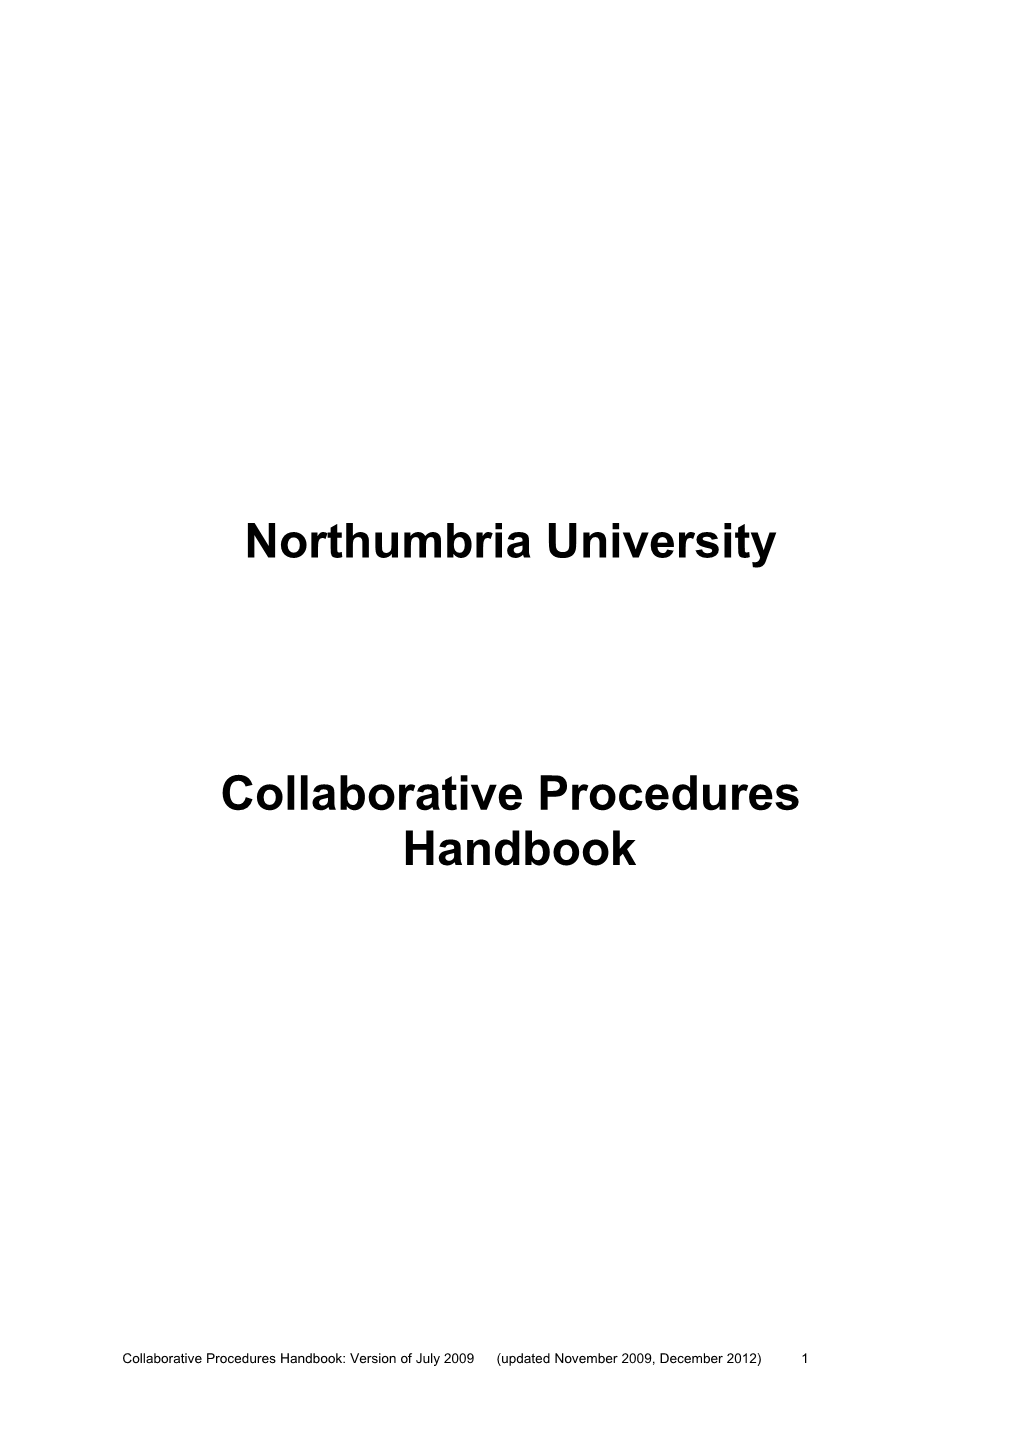 Introduction to Collaborative Procedures